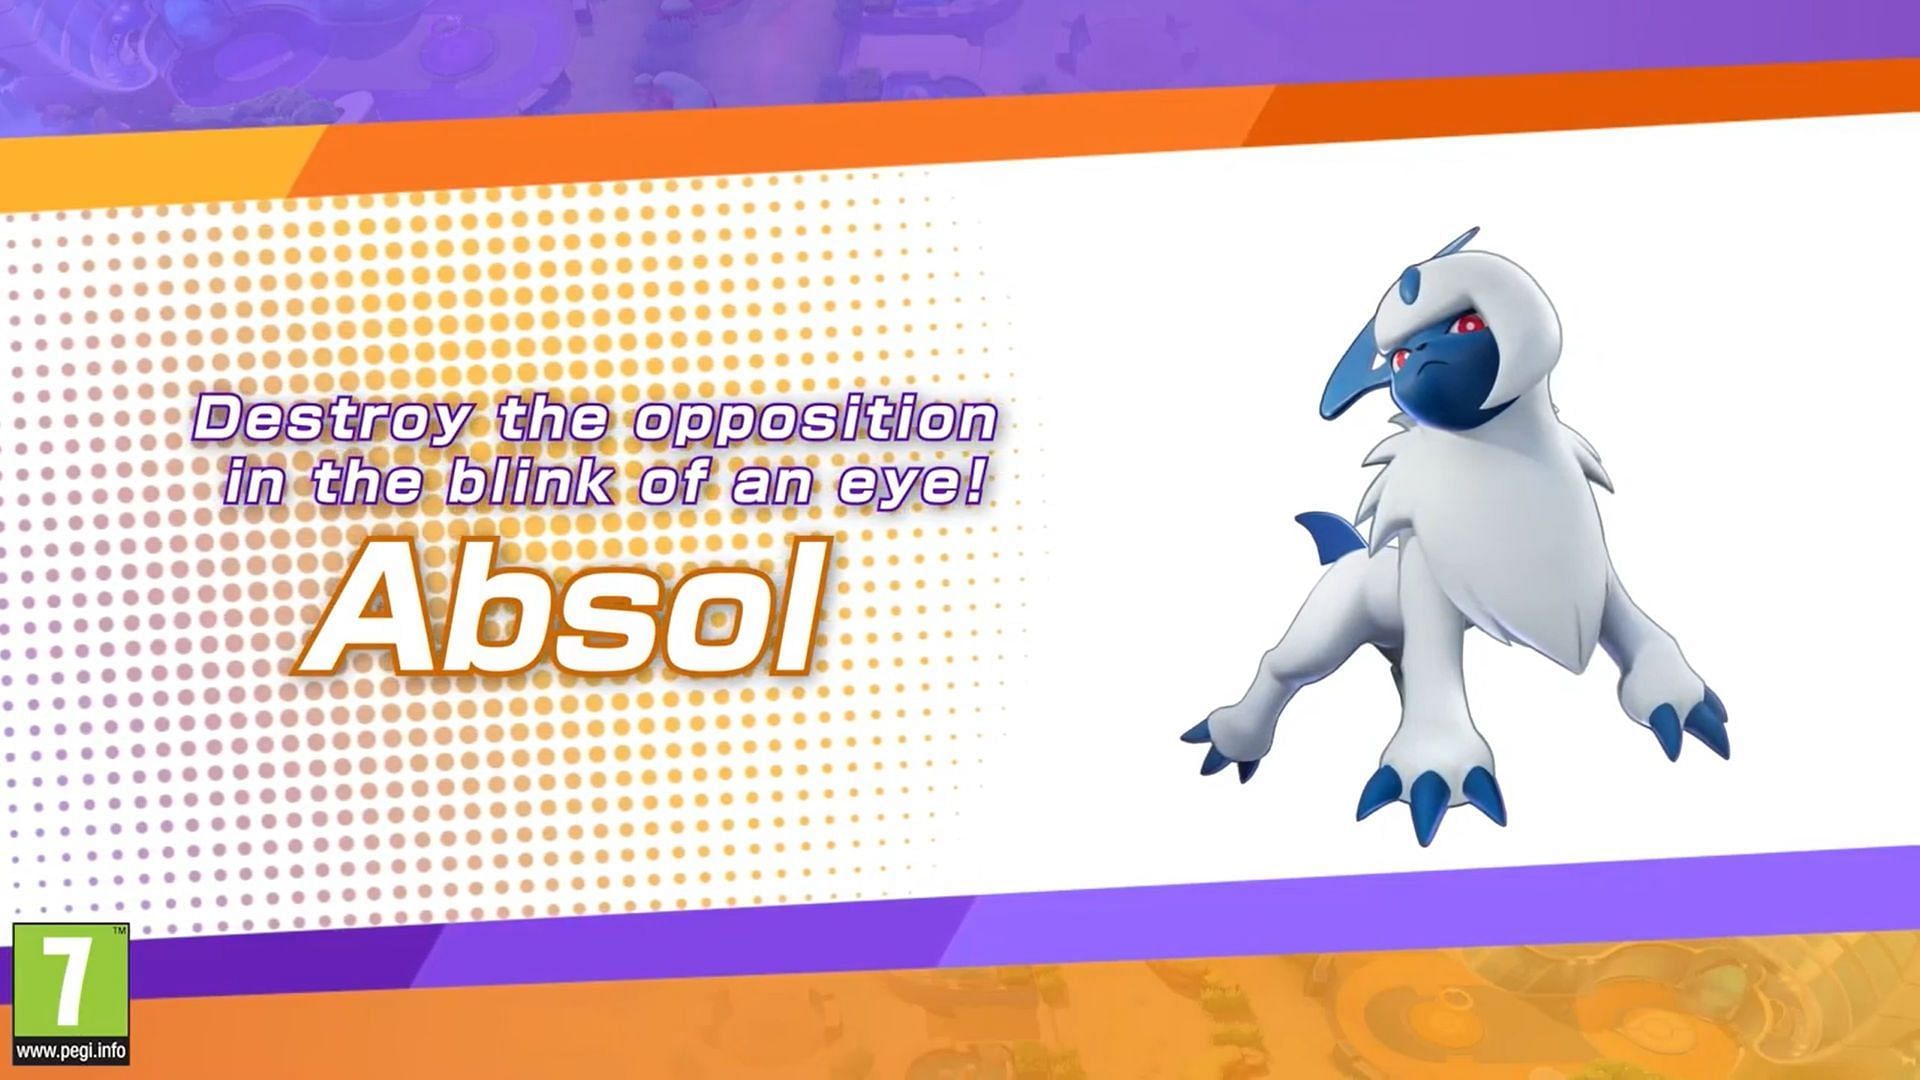 Official imagery used for Absol in Pokemon Unite (Image via The Pokemon Company)